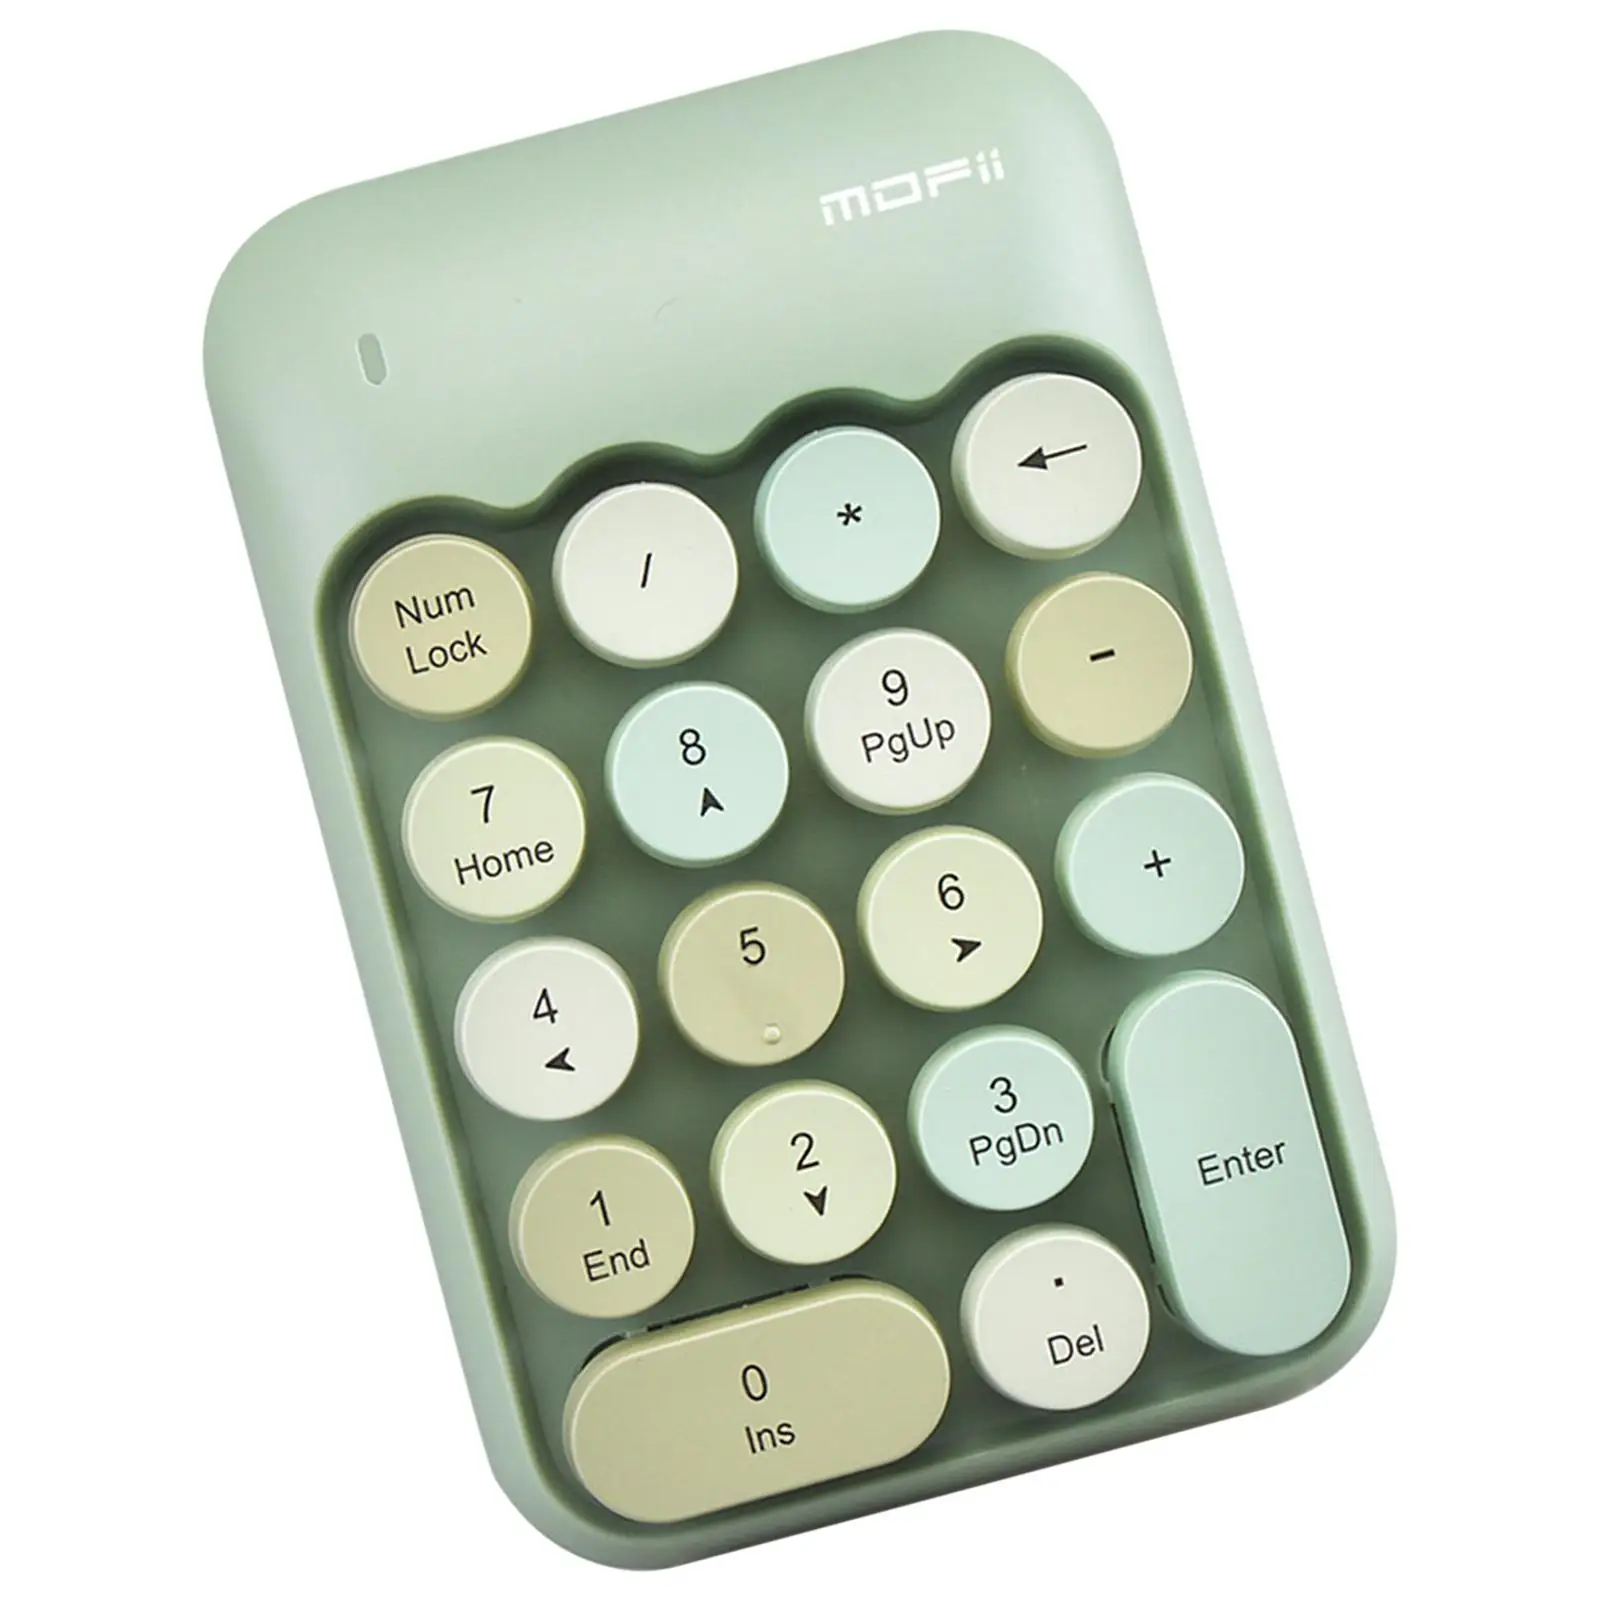 Wireless Numerical Keypad, 18 Keys 2.4 GHz USB Number Pad Financial Accounting Numeric Keypad for Laptop PC Notebook Desktop